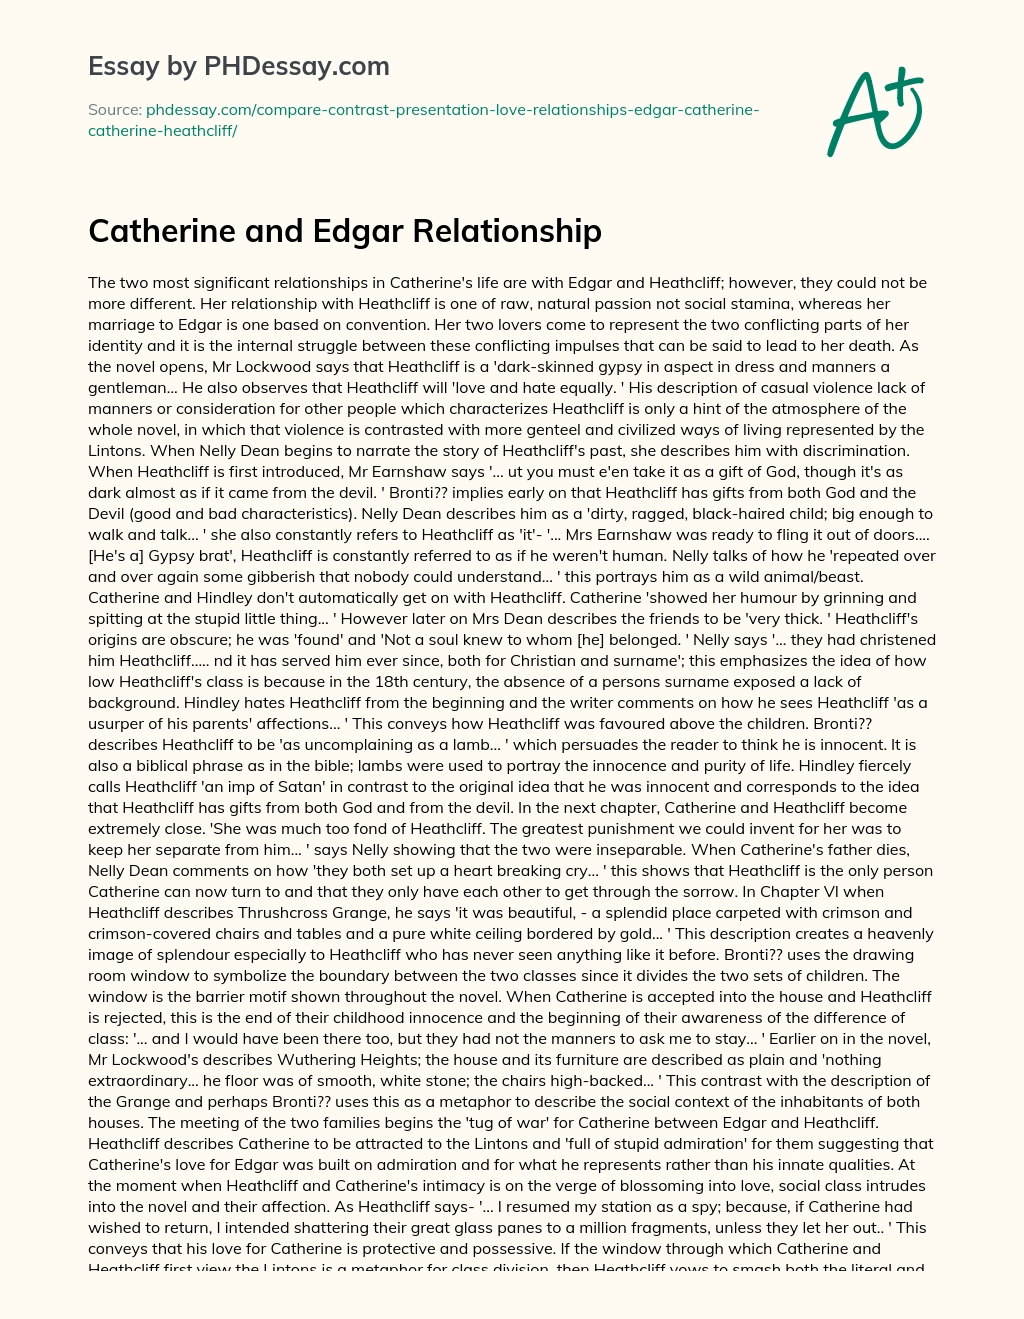 Catherine and Edgar Relationship essay